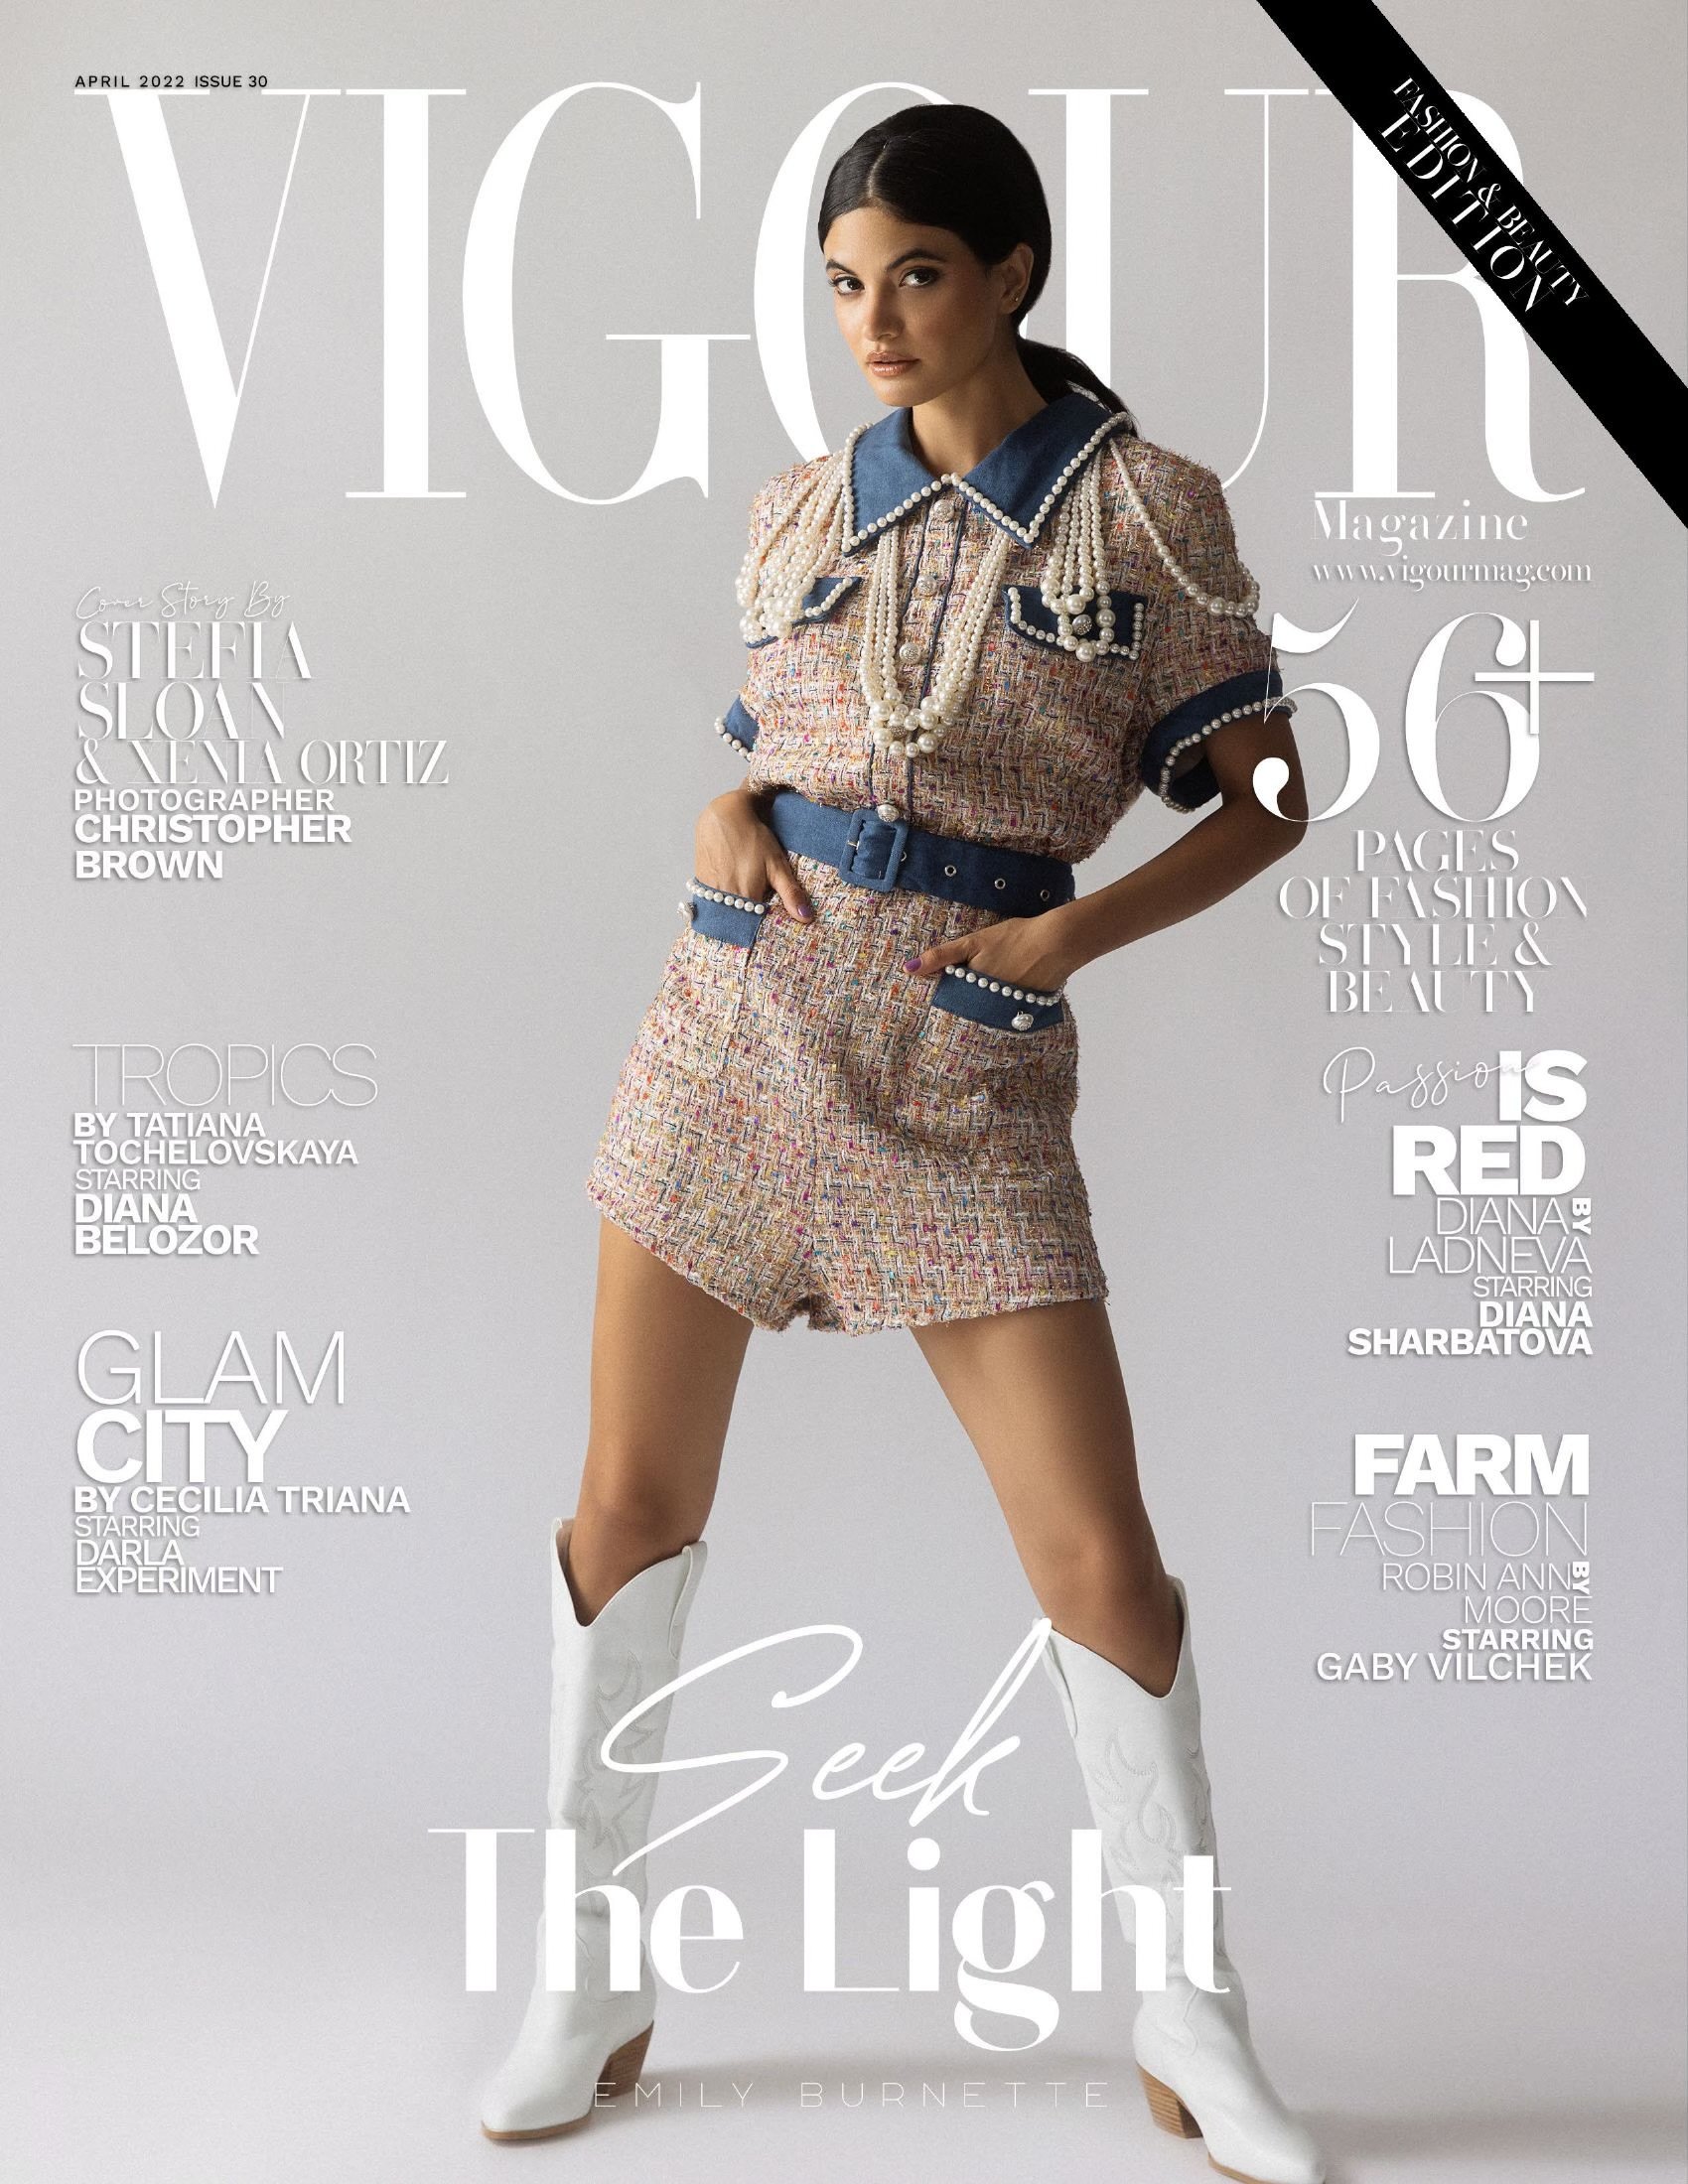  Vigour magazine cover with model in tweed jumpsuit. Styled by Emily Burnette. 